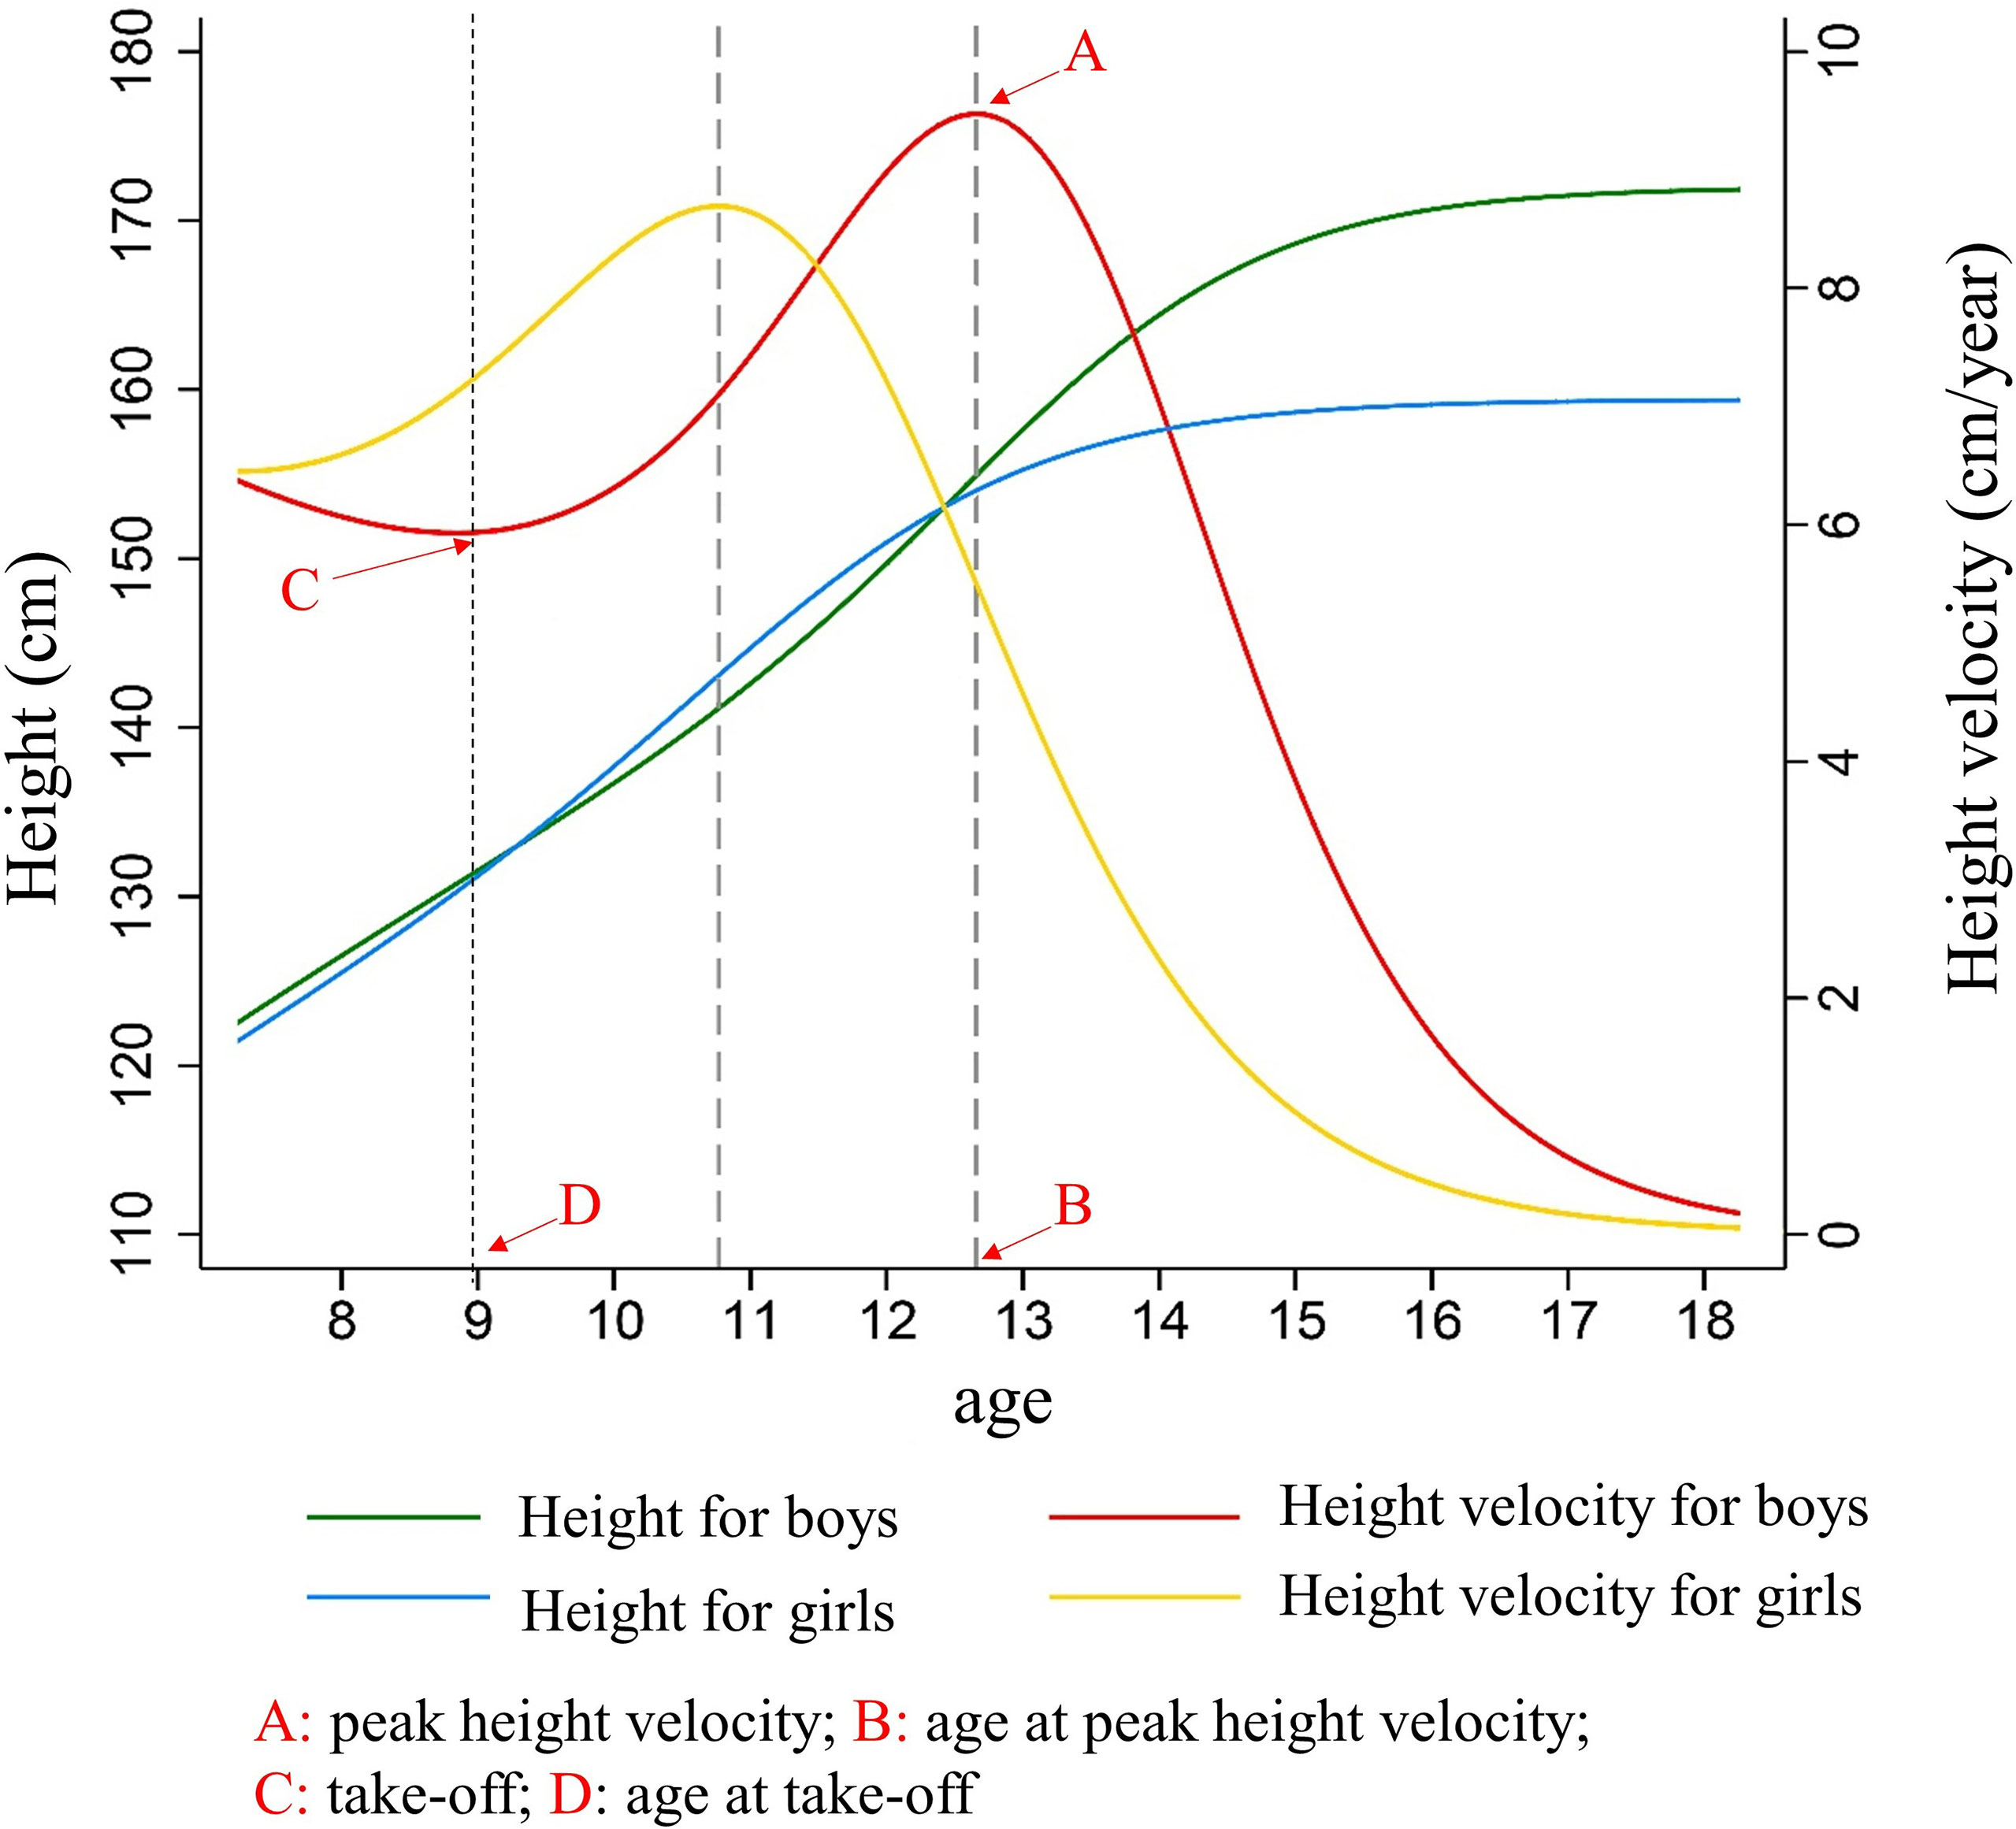 Frontiers  Association between height growth patterns in puberty and  stature in late adolescence: A longitudinal analysis in chinese children  and adolescents from 2006 to 2016